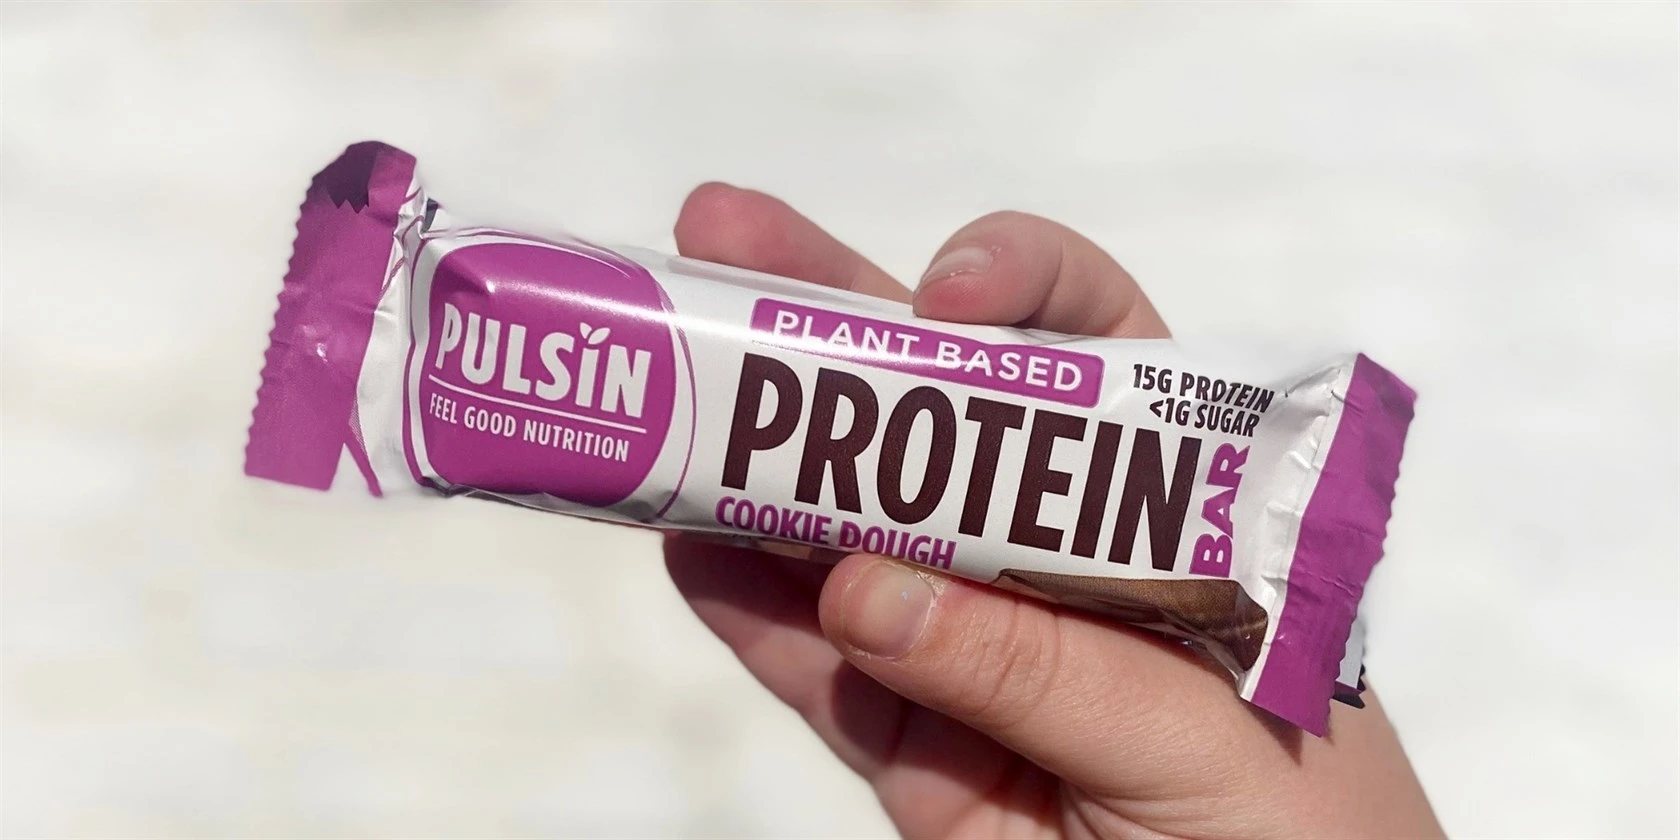 New protein bars